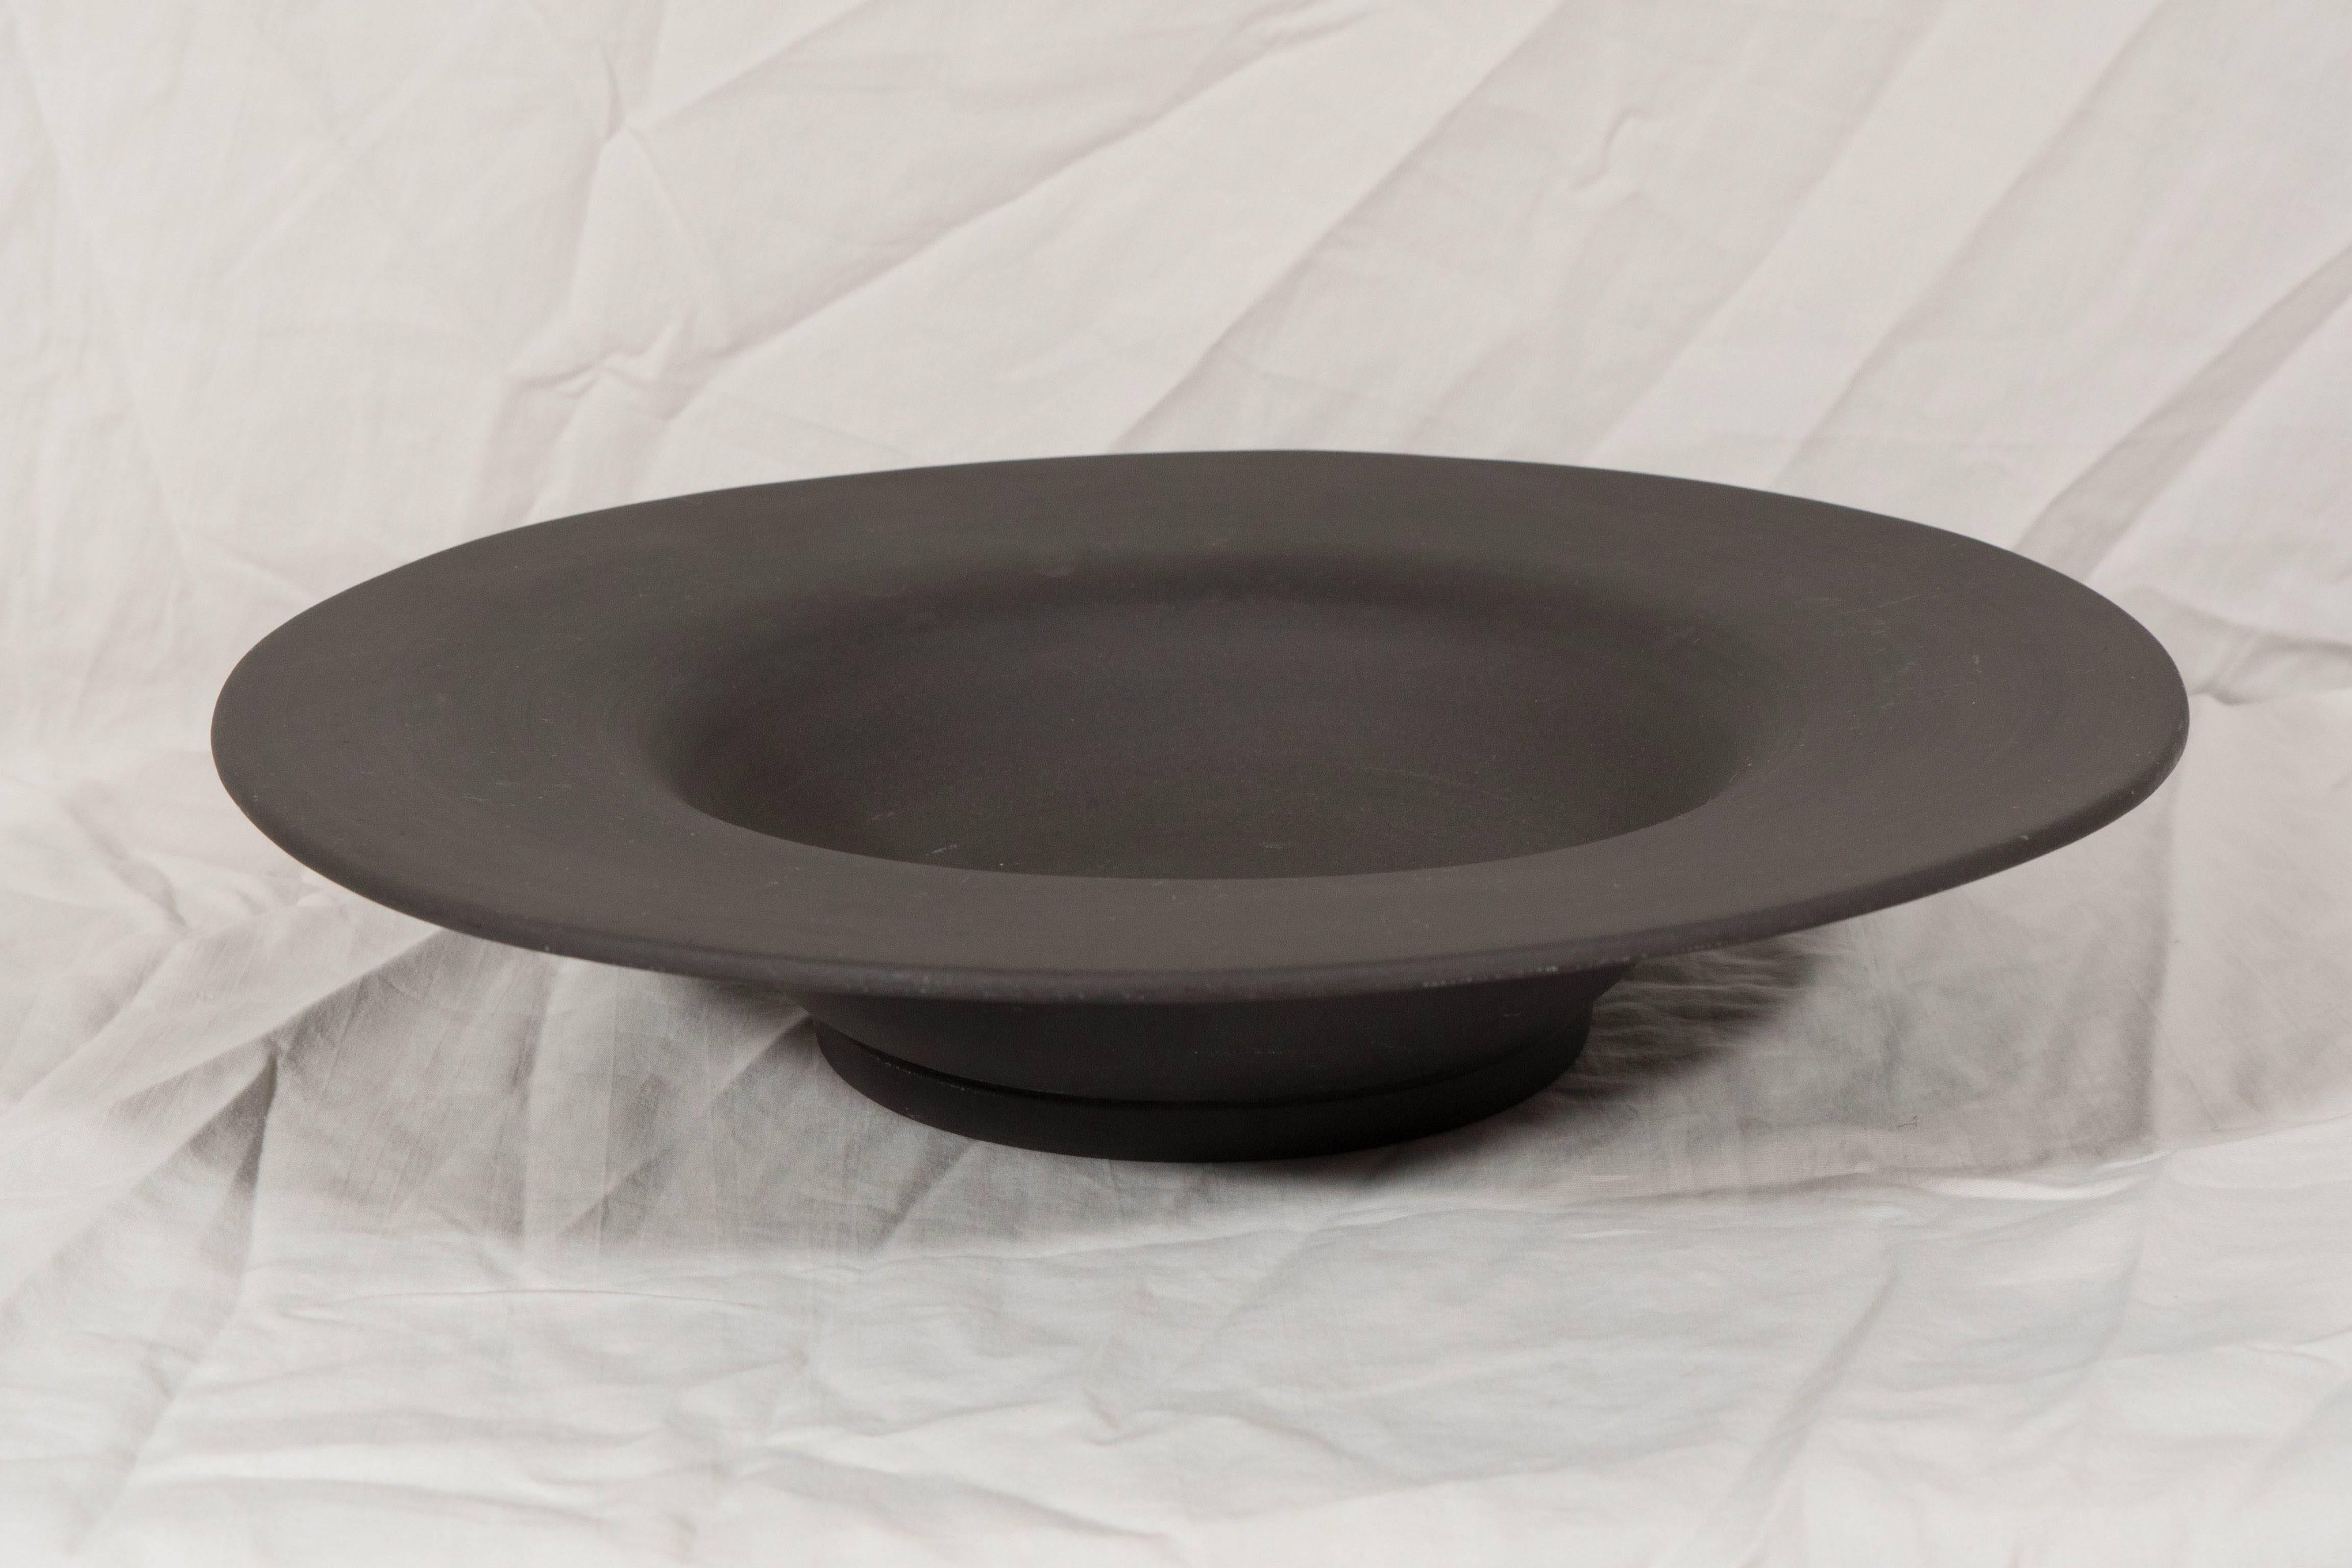 A Wedgwood black basalt bowl in a simple open form with a wide lip. 
 Black basalt was created by Josiah Wedgwood in the 18th century. Wedgwood transformed Egyptian black, a traditional Staffordshire stoneware, into black basalt. Before Wedgwood’s